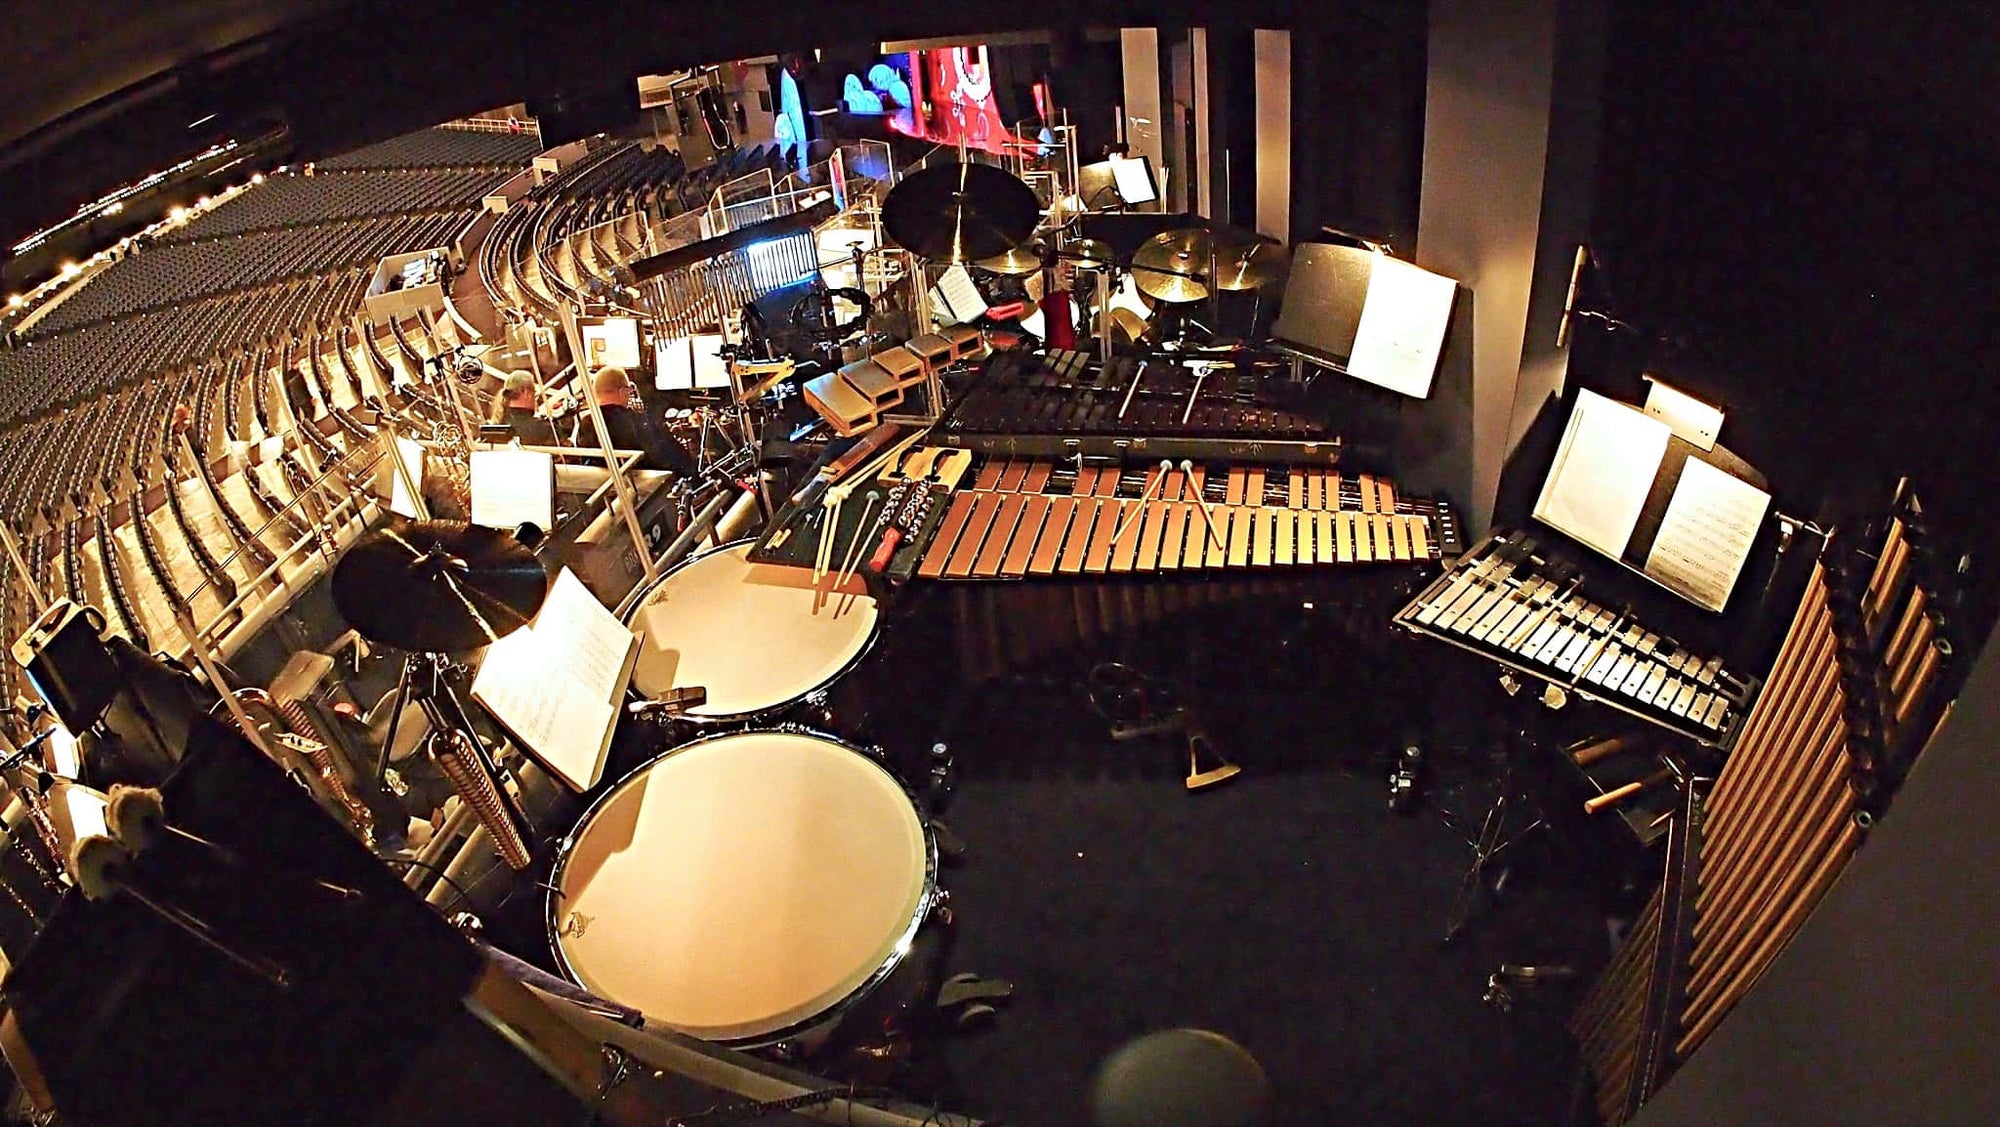 Dave Roth's percussion setup for the Madison Square Garden production of Dr Seuss' How the Grinch Stole Christmas.